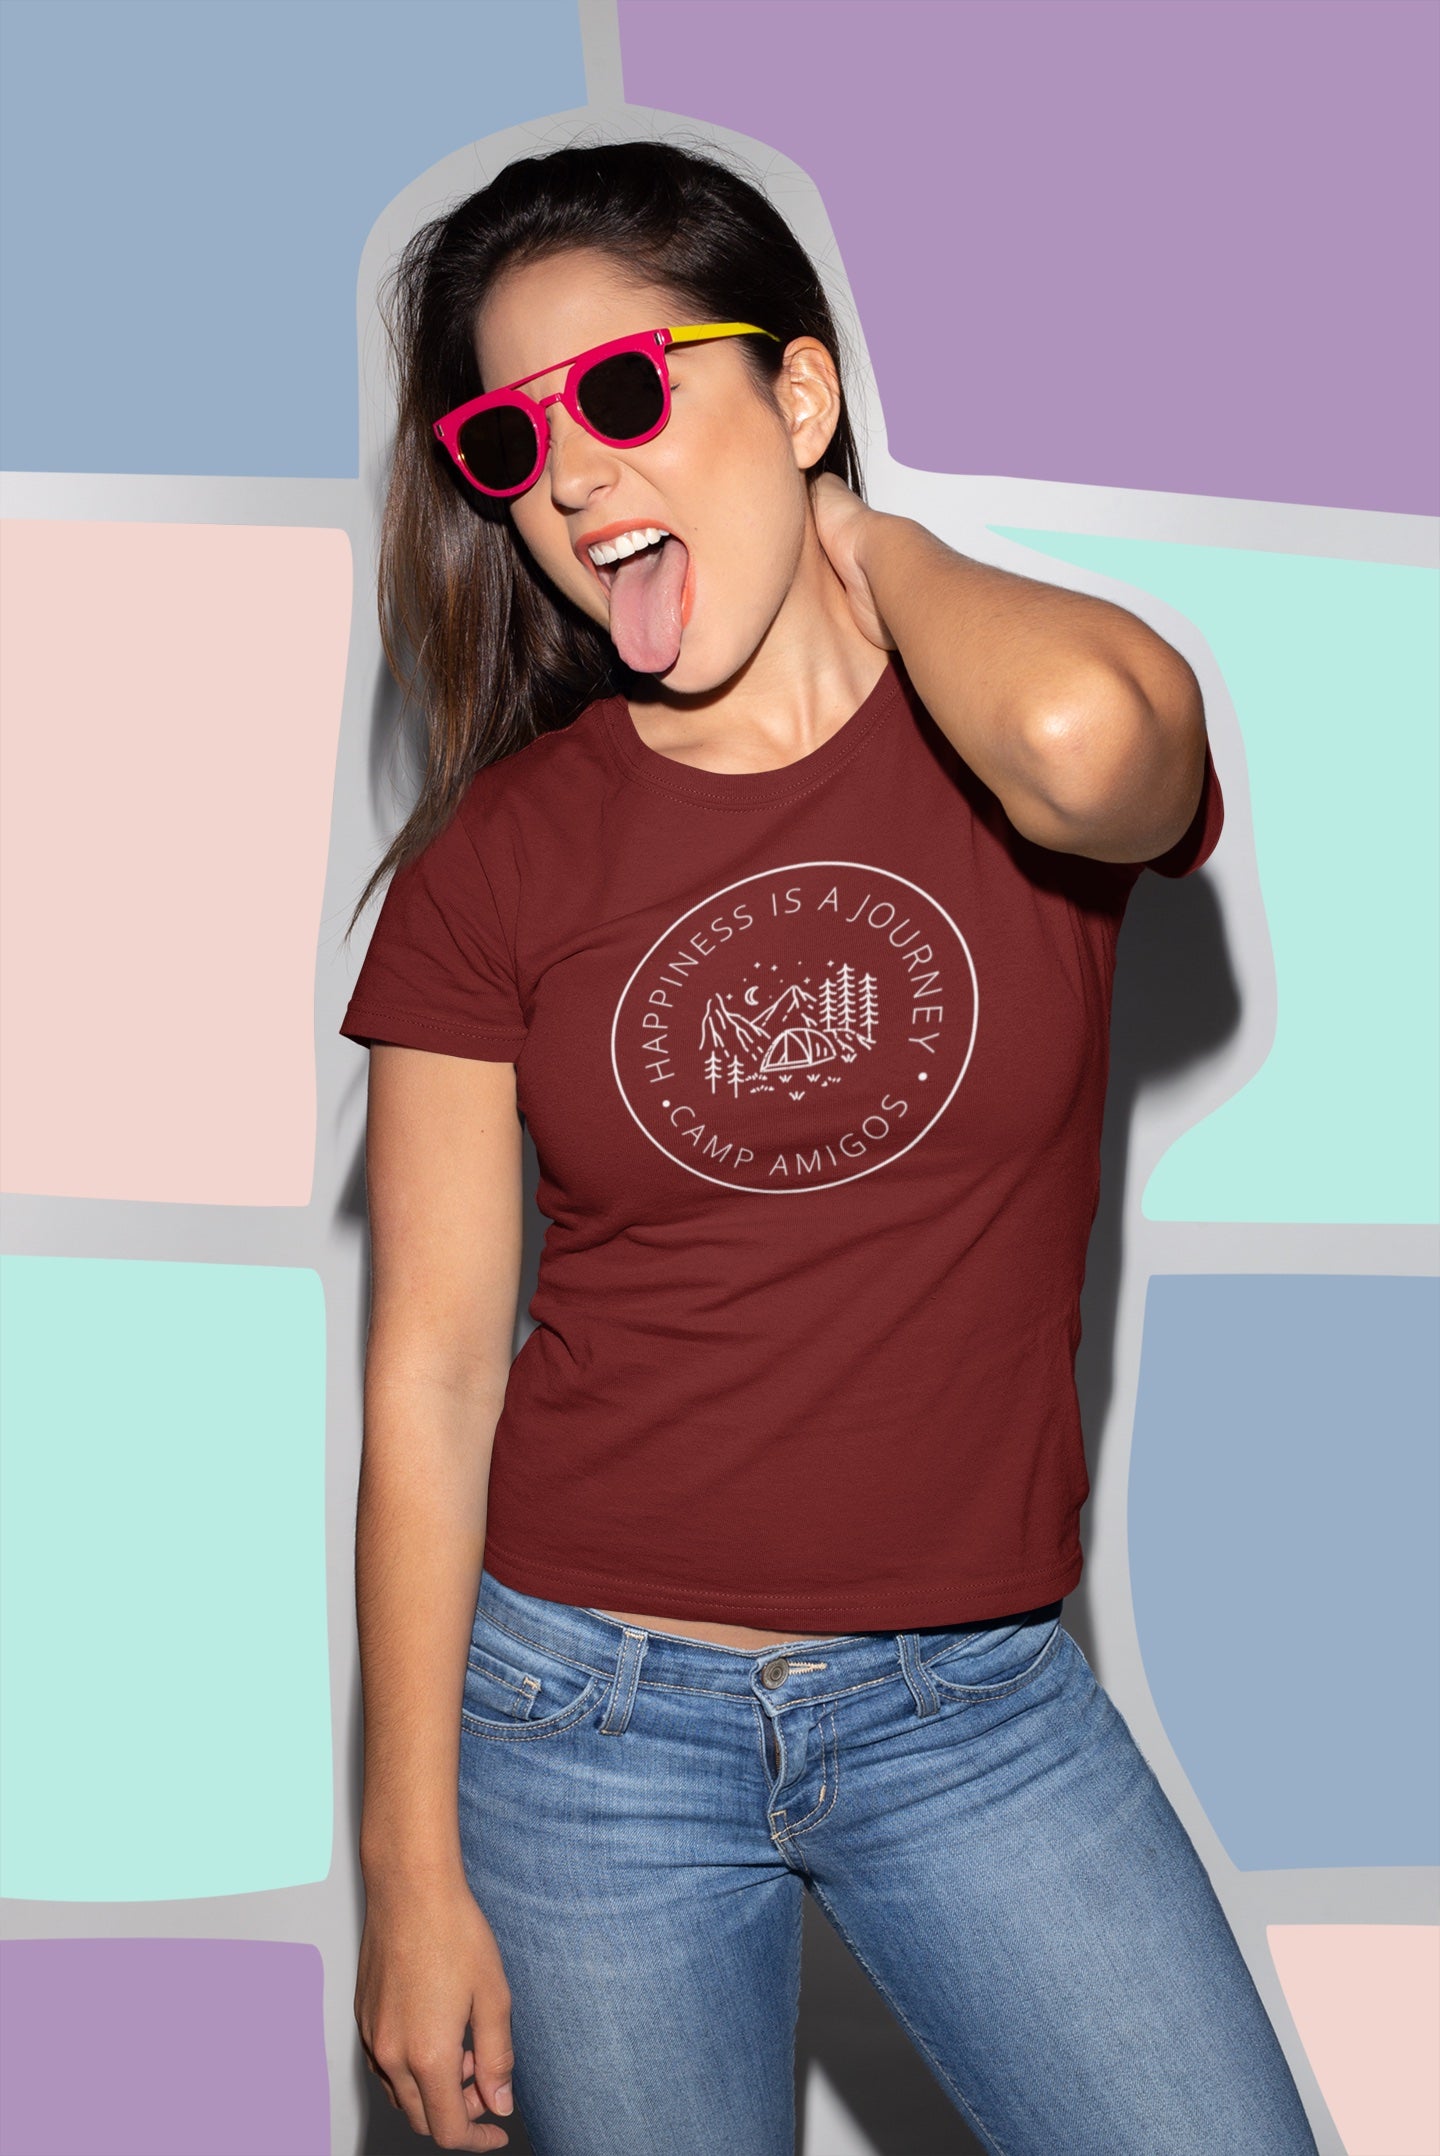 HAPPINESS IS A JOURNEY  PRINTED TSHIRT - MAROON